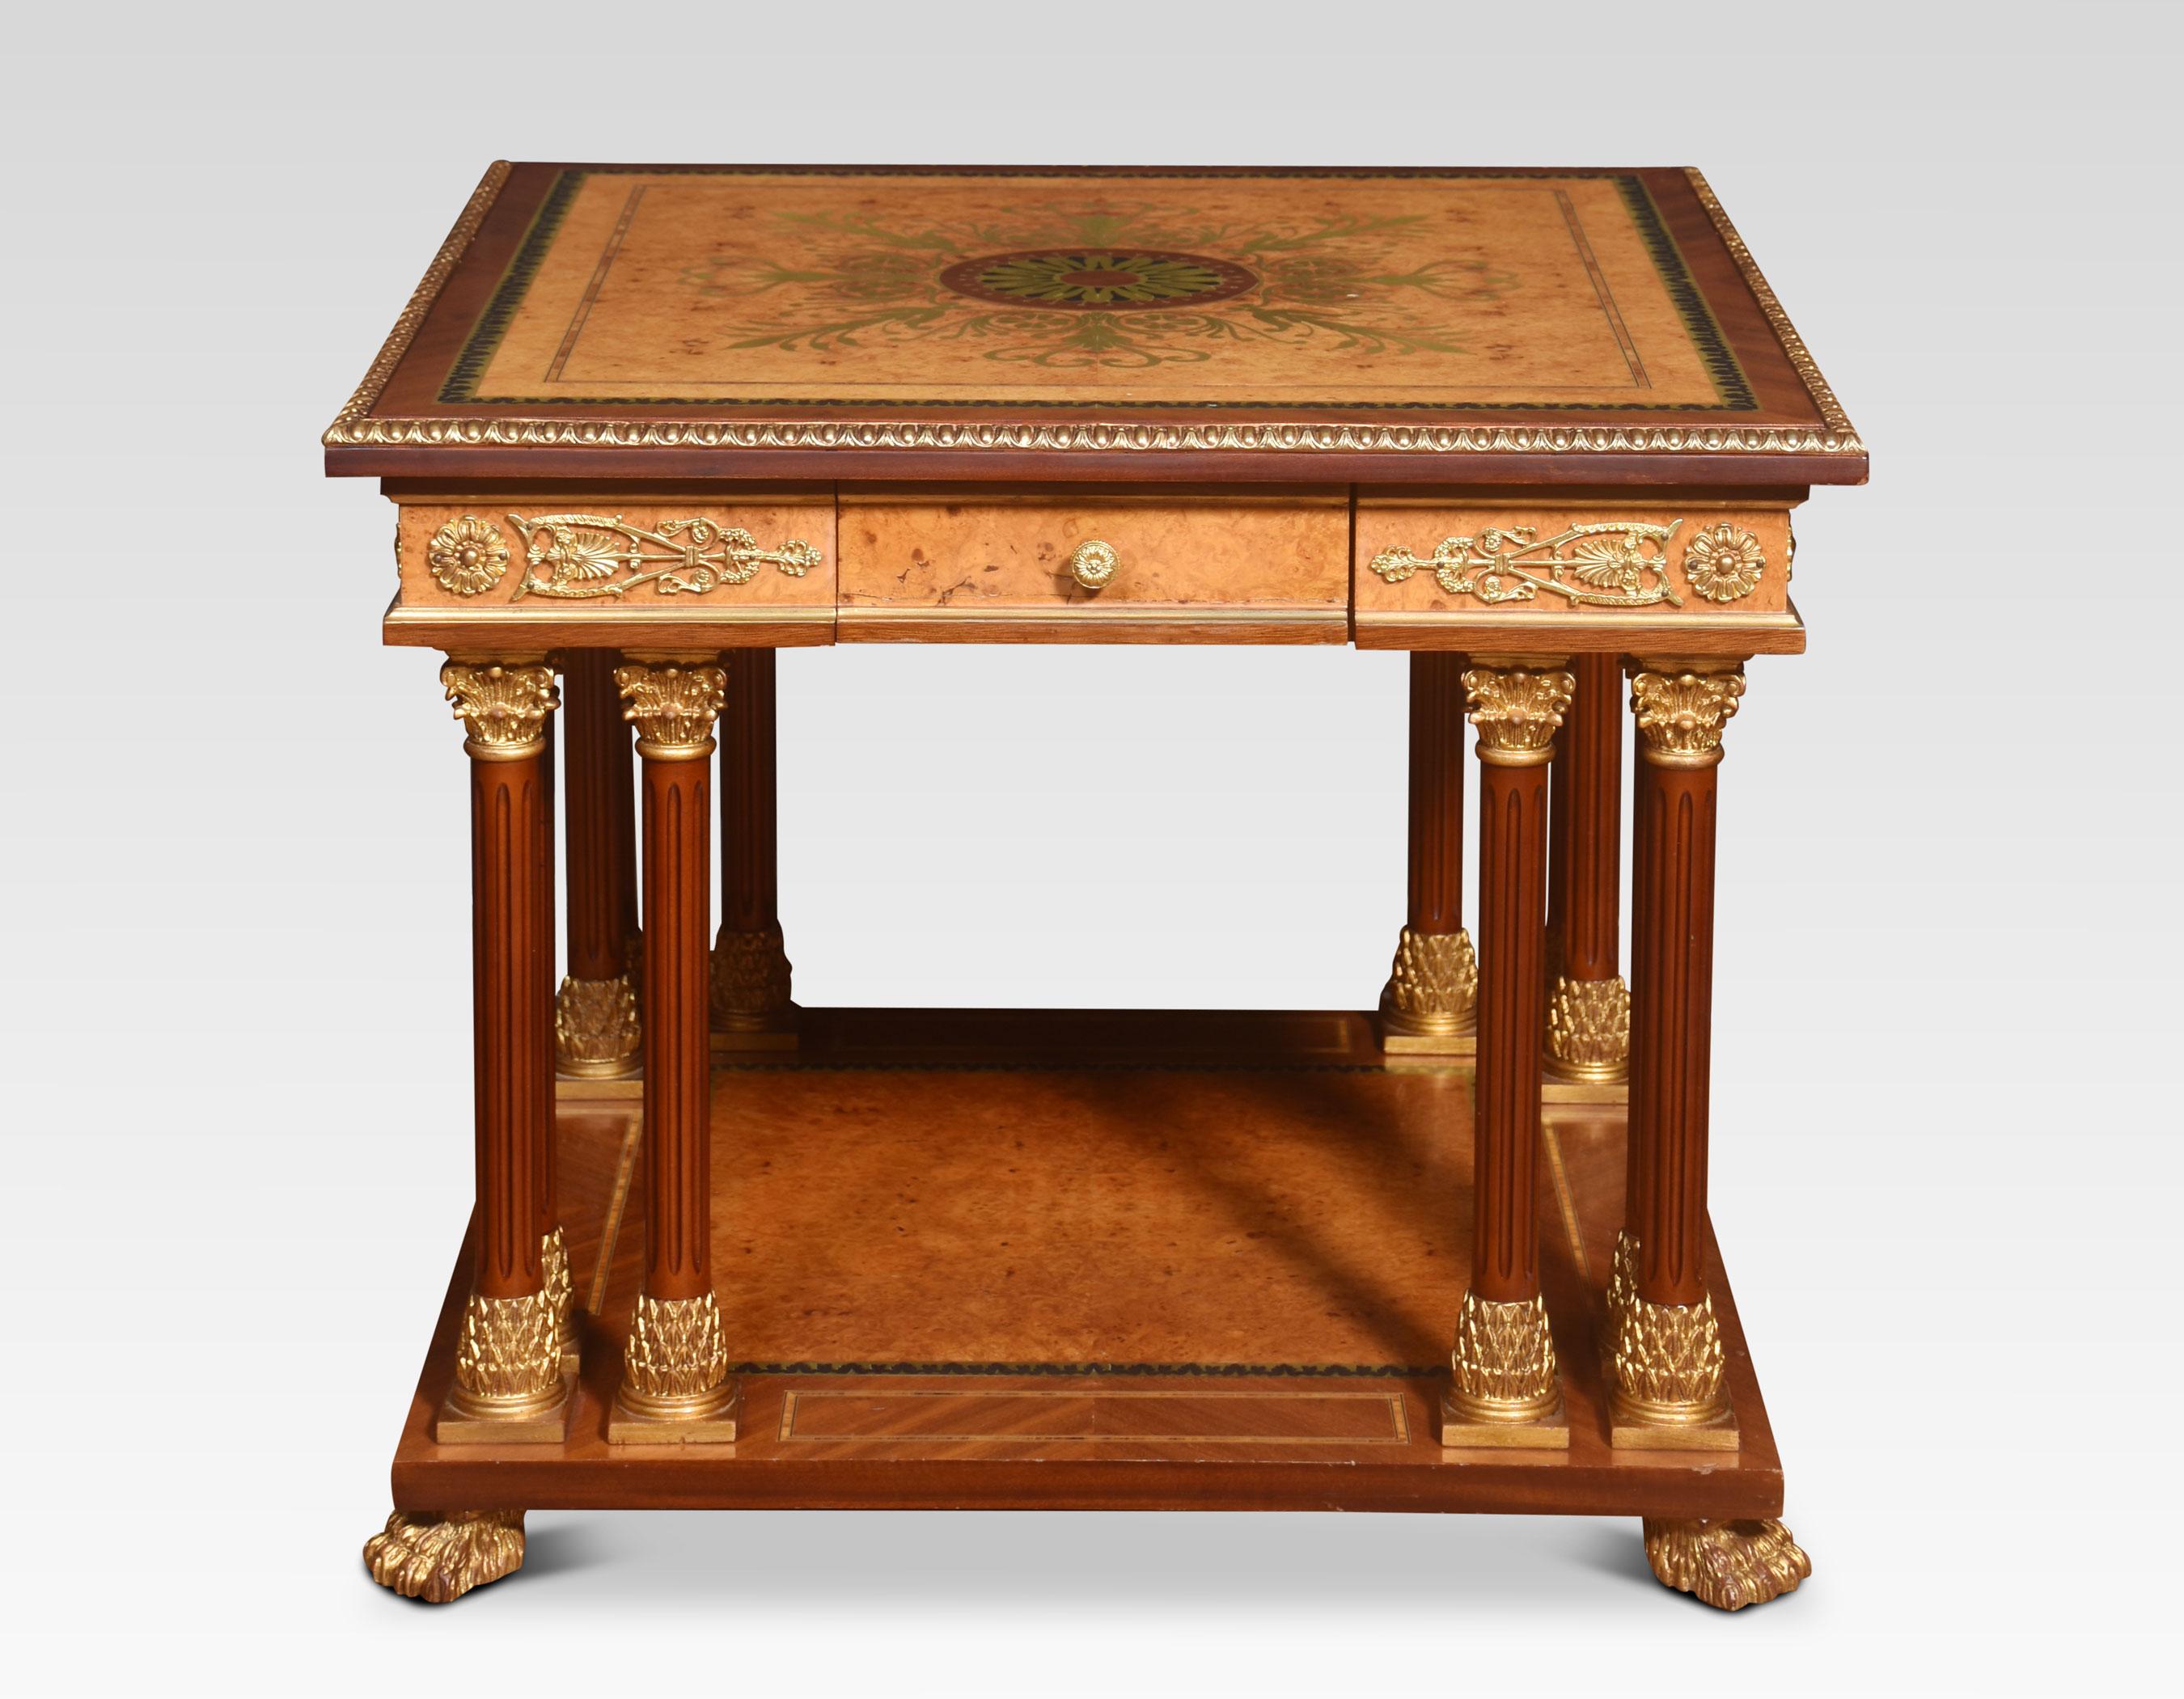 Louis XVI style coffee table, the anthemion brass inlaid top having ebonised border and tooled edge. To the frieze fitted with a drawer. Raised on column legs, gilt metal mounts throughout. Terminating in hairy lion paw feet.
Dimensions
Height 24